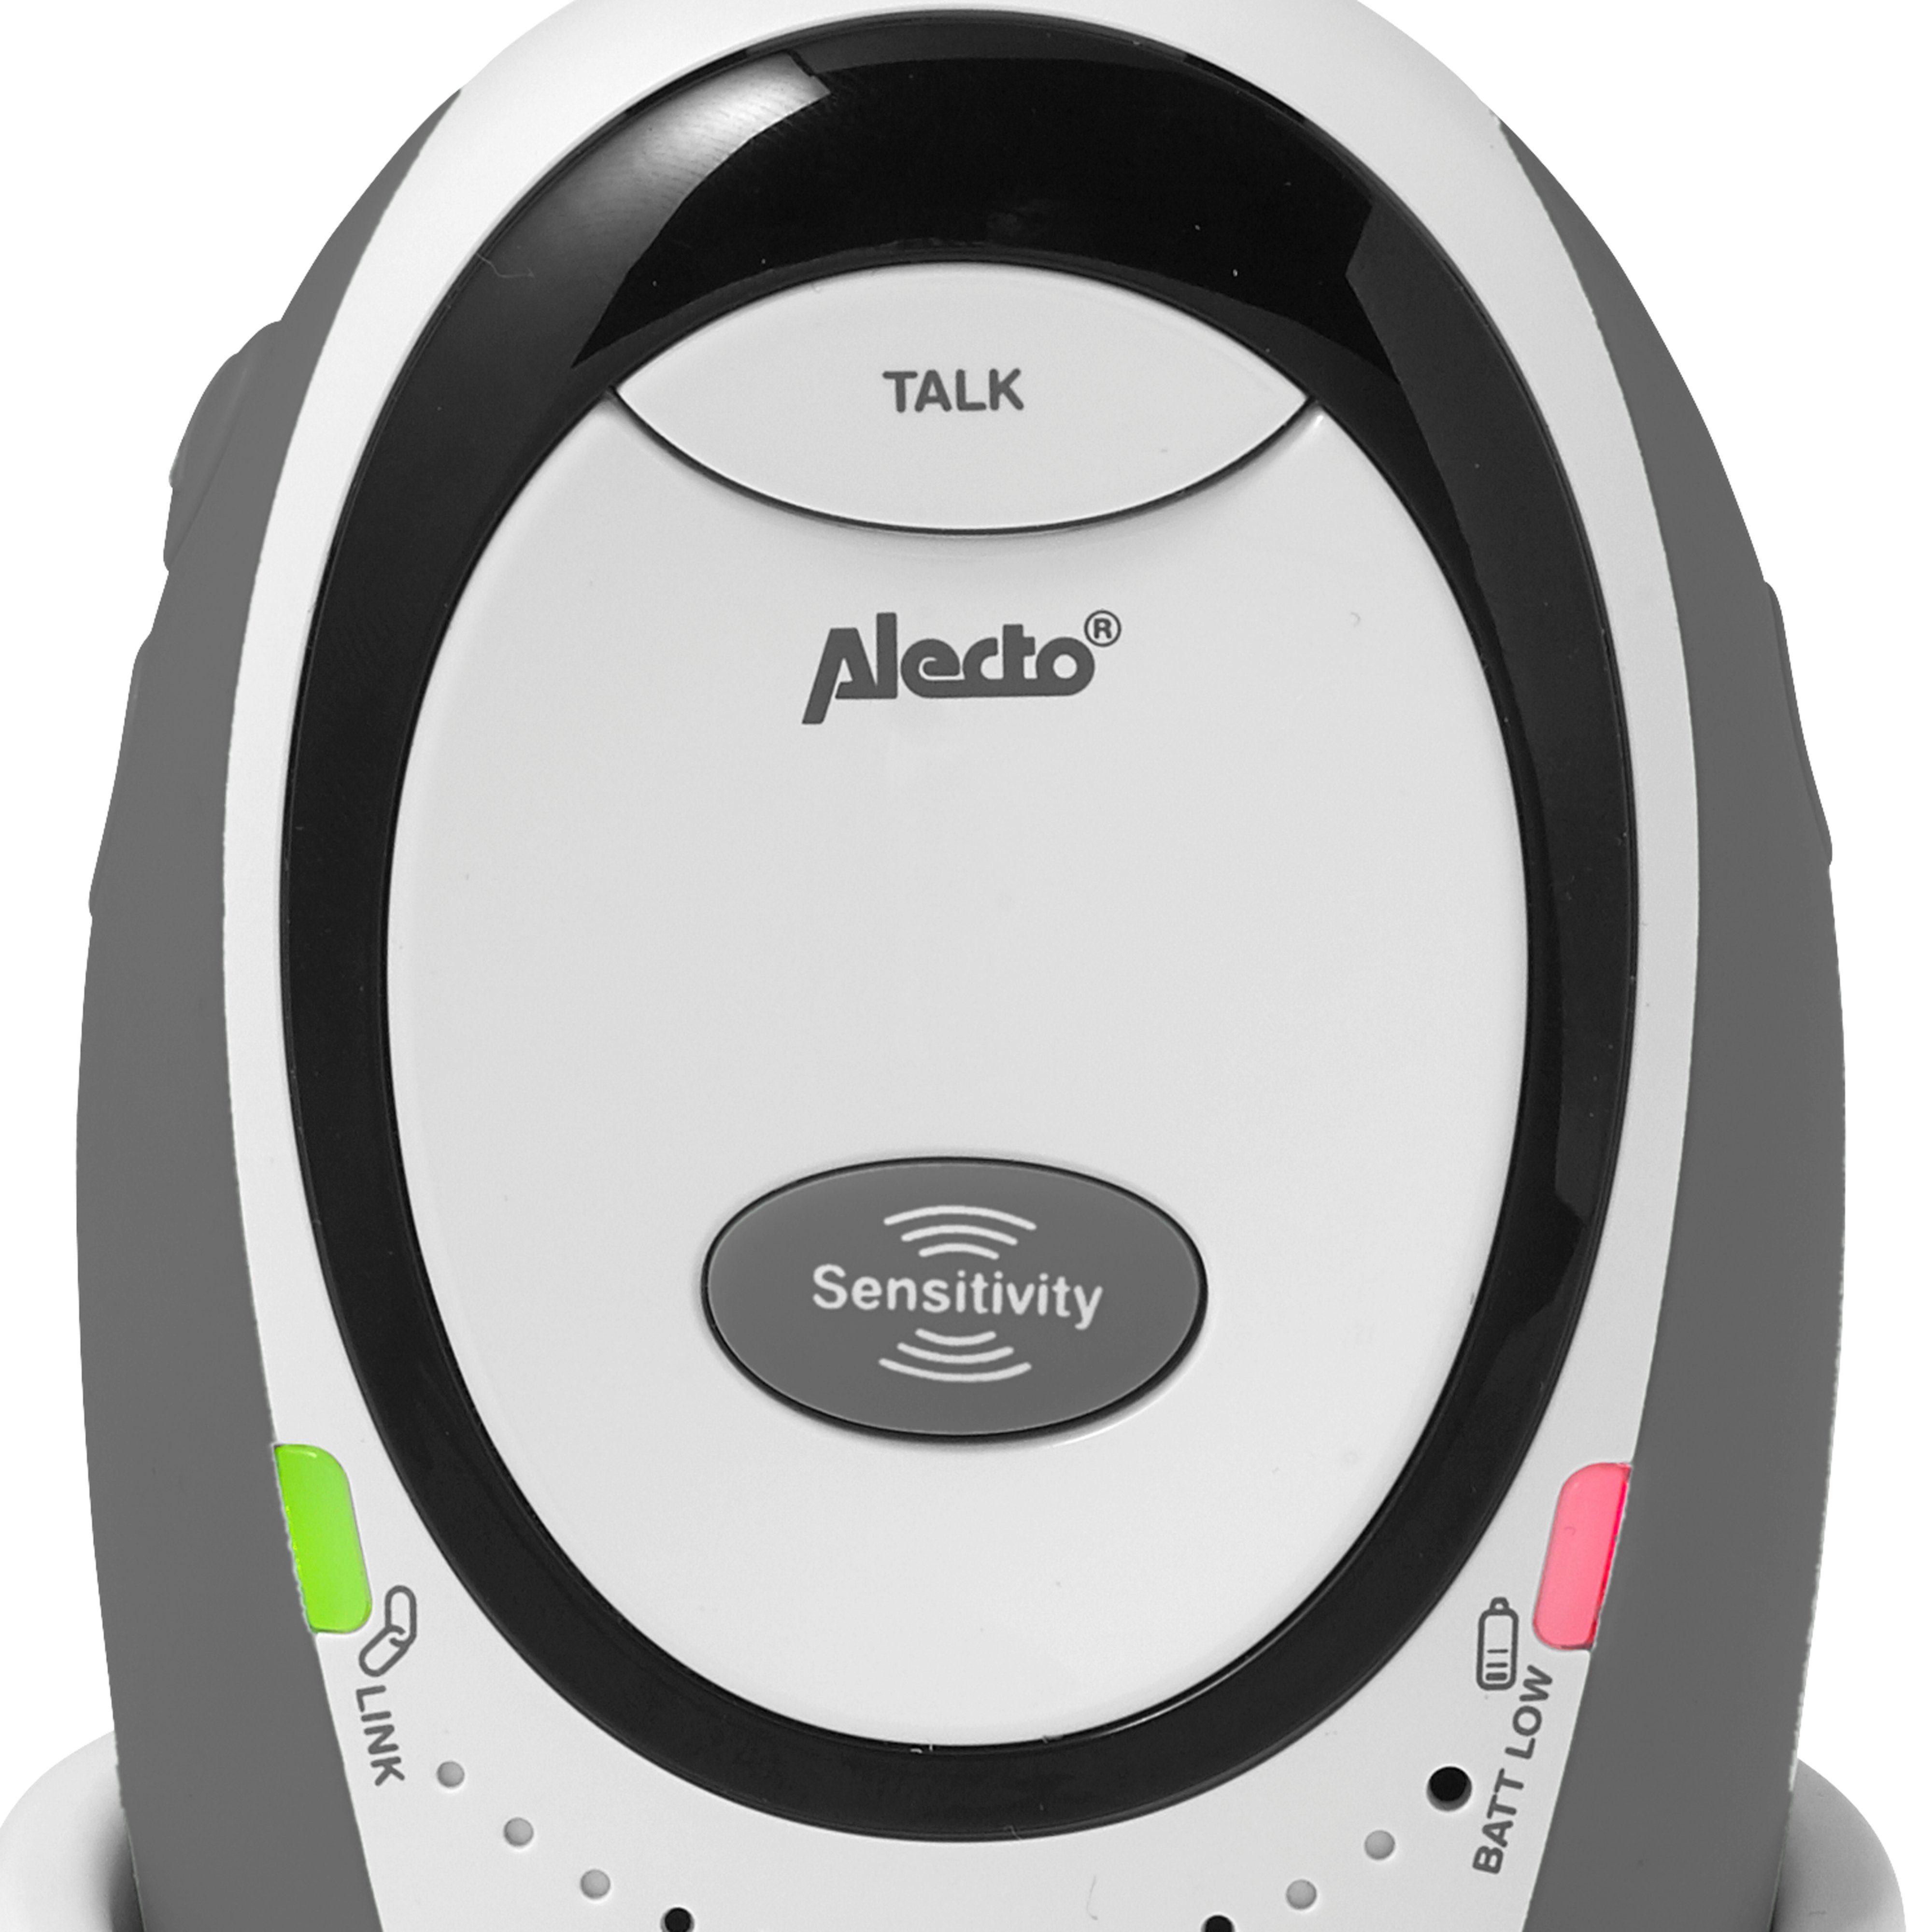 LIMITED Babyphone mit Babyphone Alecto ECO-Modus DECT DBX-85 Full